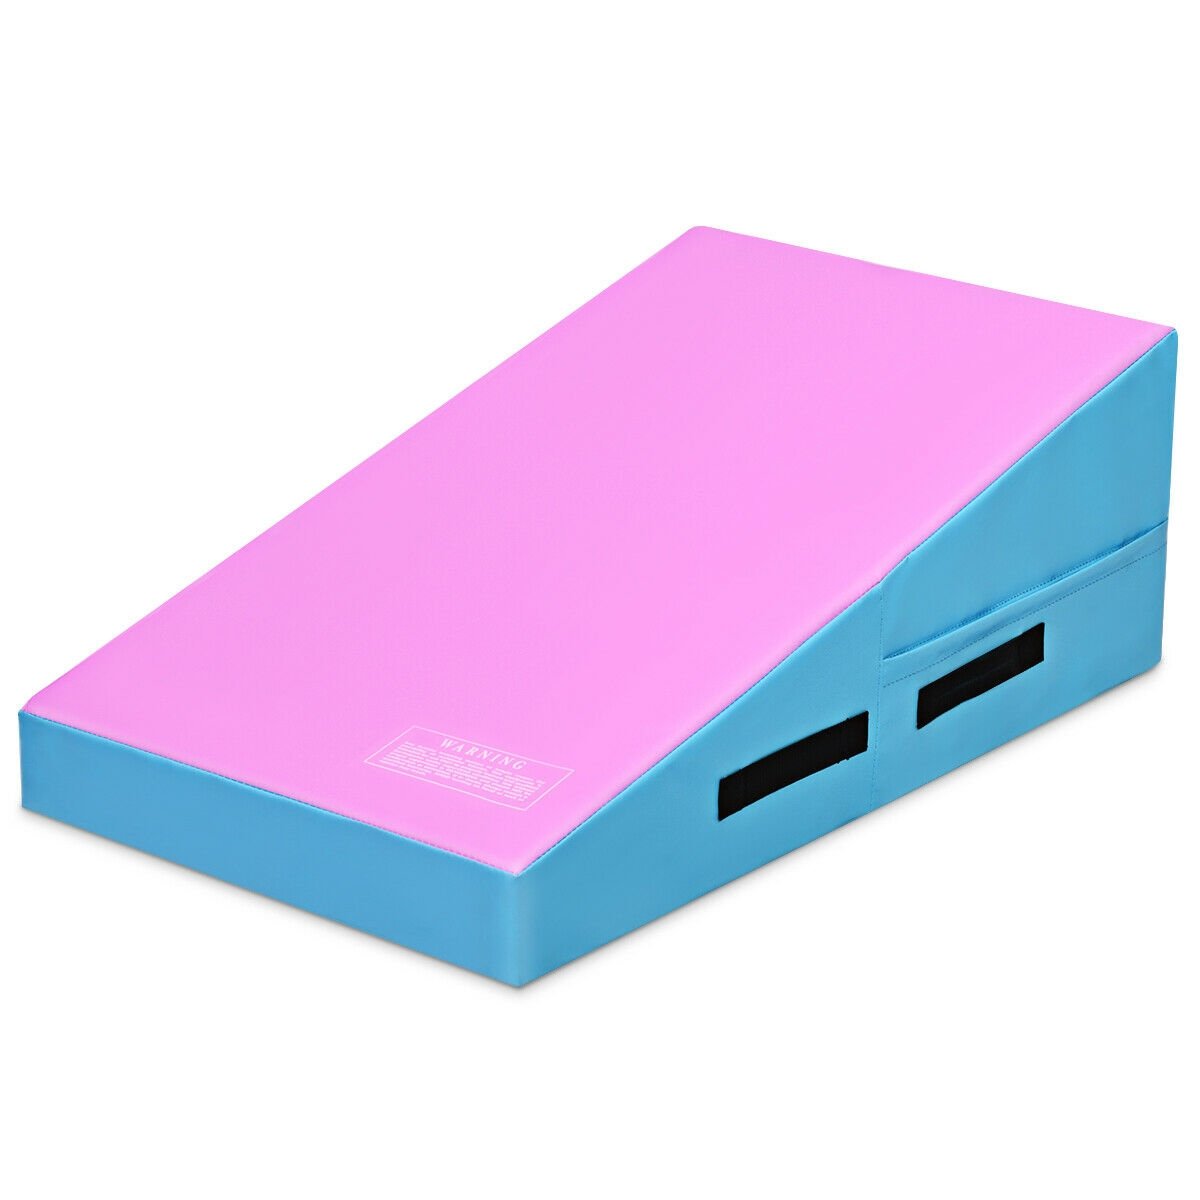 Incline Gymnastics Mat Wedge Ramp Gym Tumbling Exercise Mat, Pink & Blue - Gallery Canada